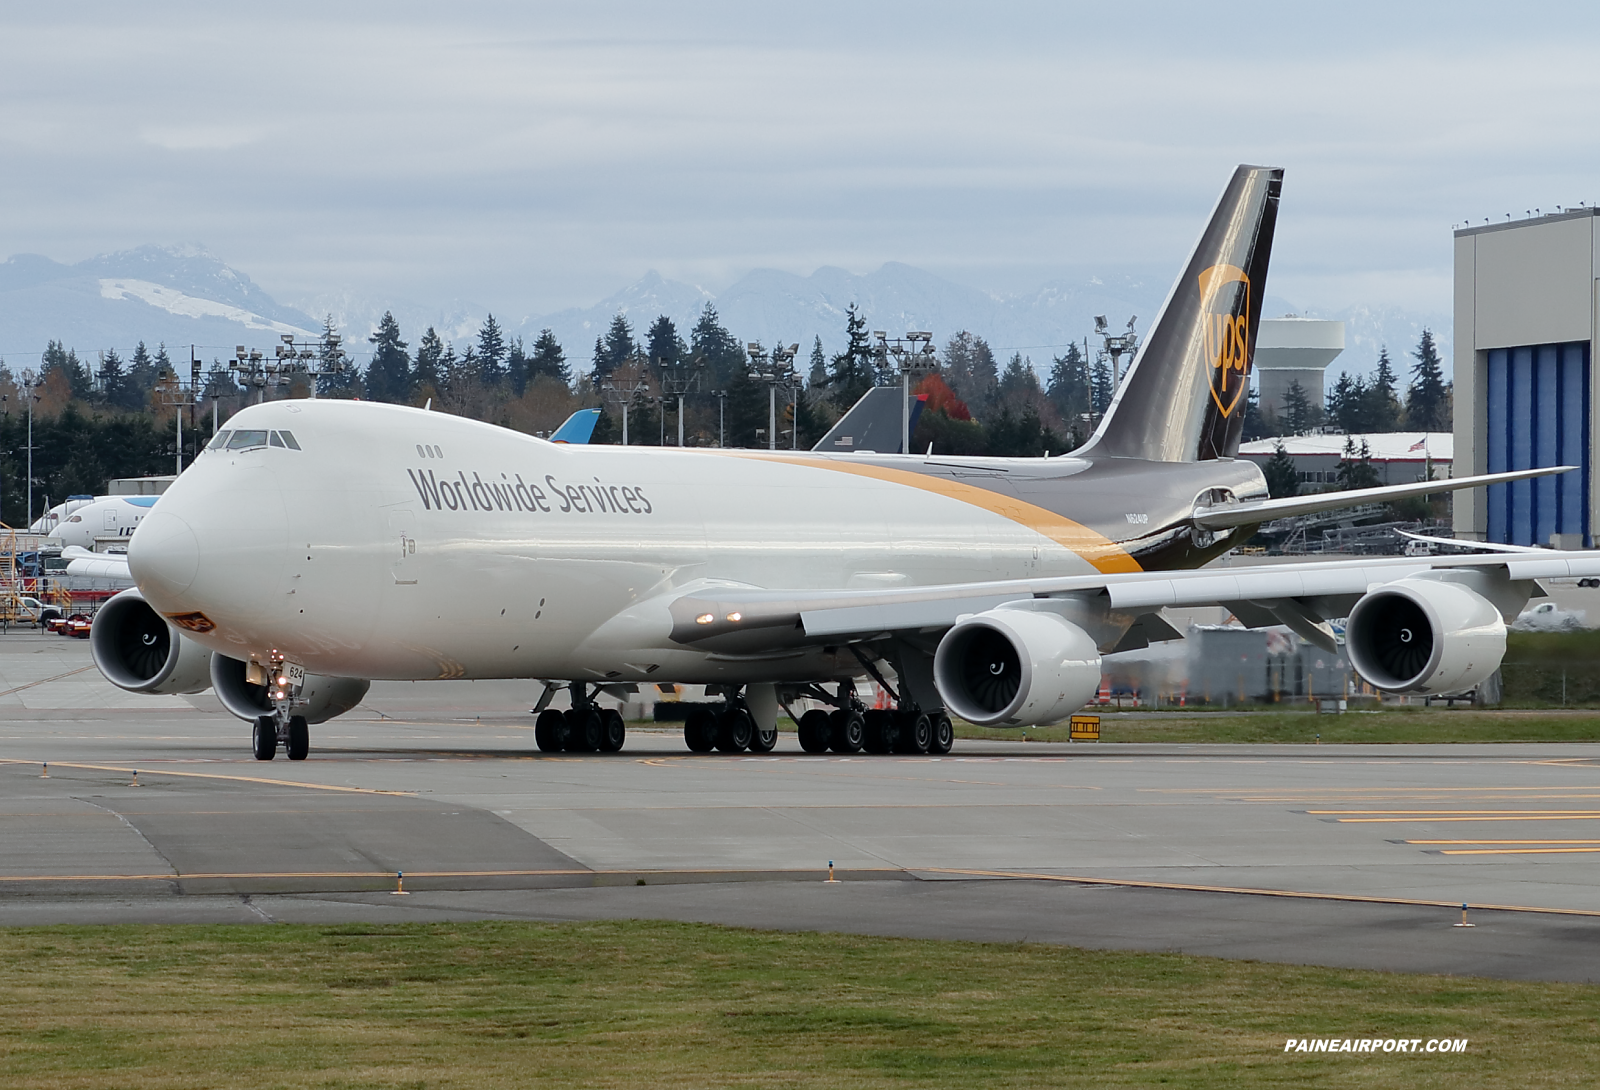 UPS 747-8F N624UP at KPAE Paine Field 